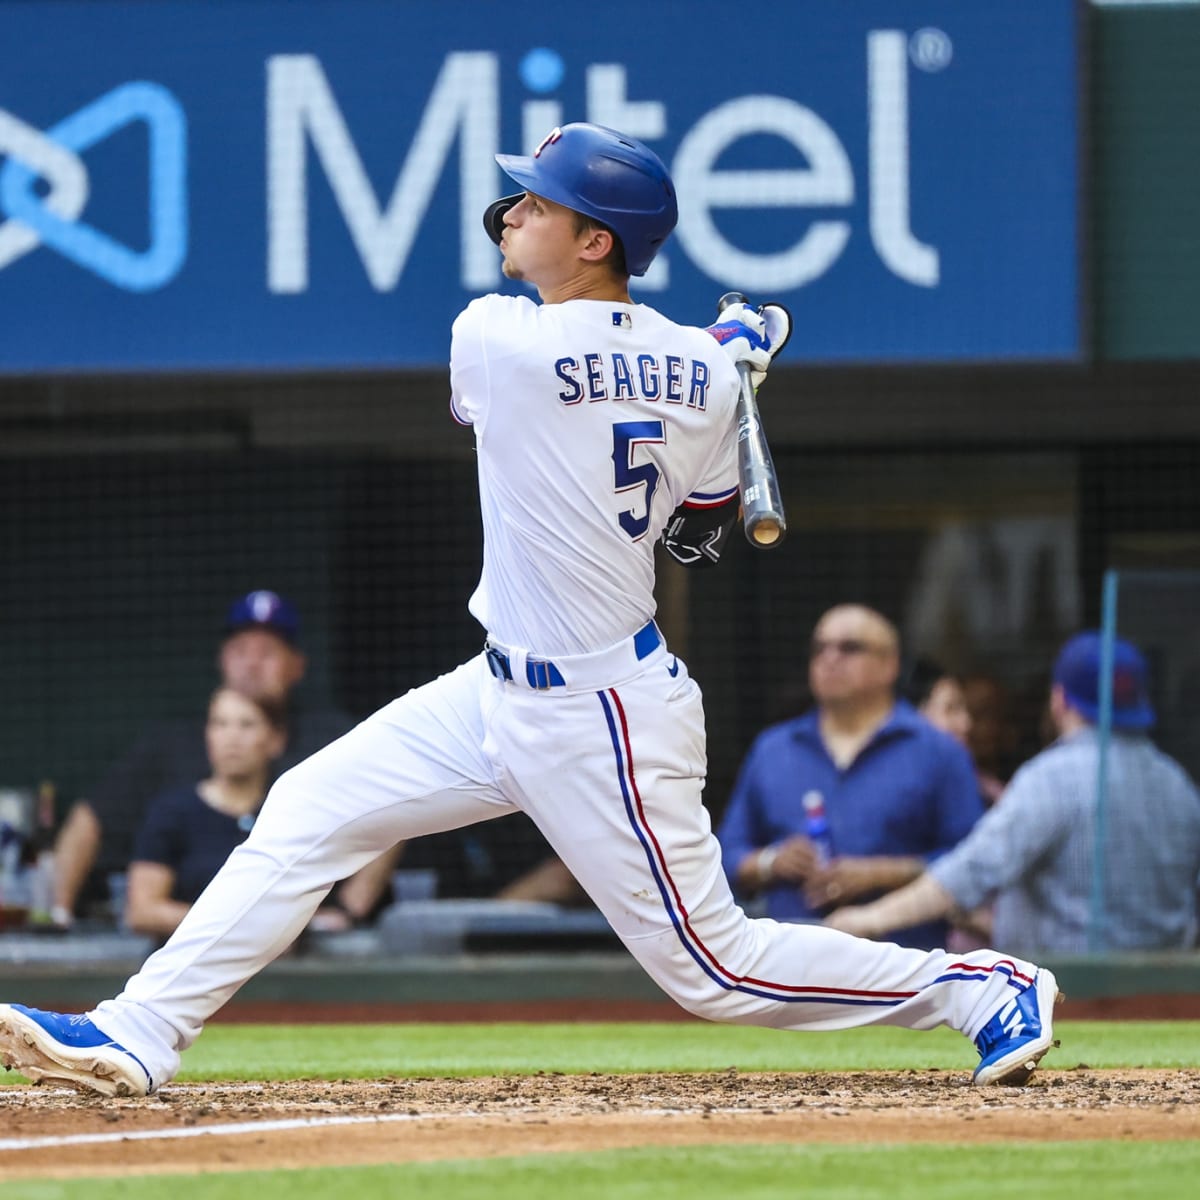 Can Corey Seager Catch Have Top 10-Homer Season in 2022? - Sports